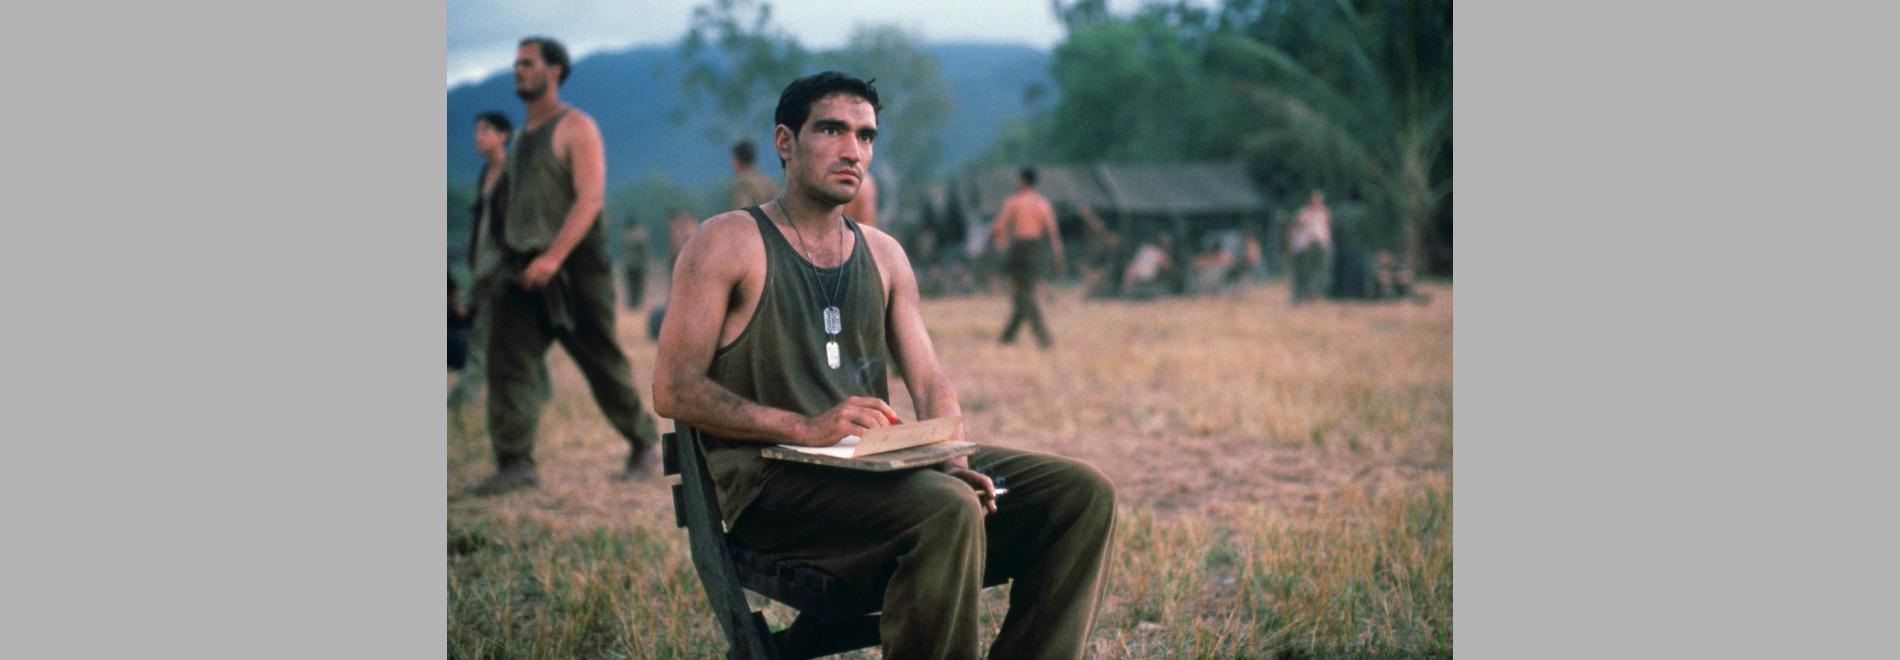 The Thin Red Line (Terrence Malick, 1998)